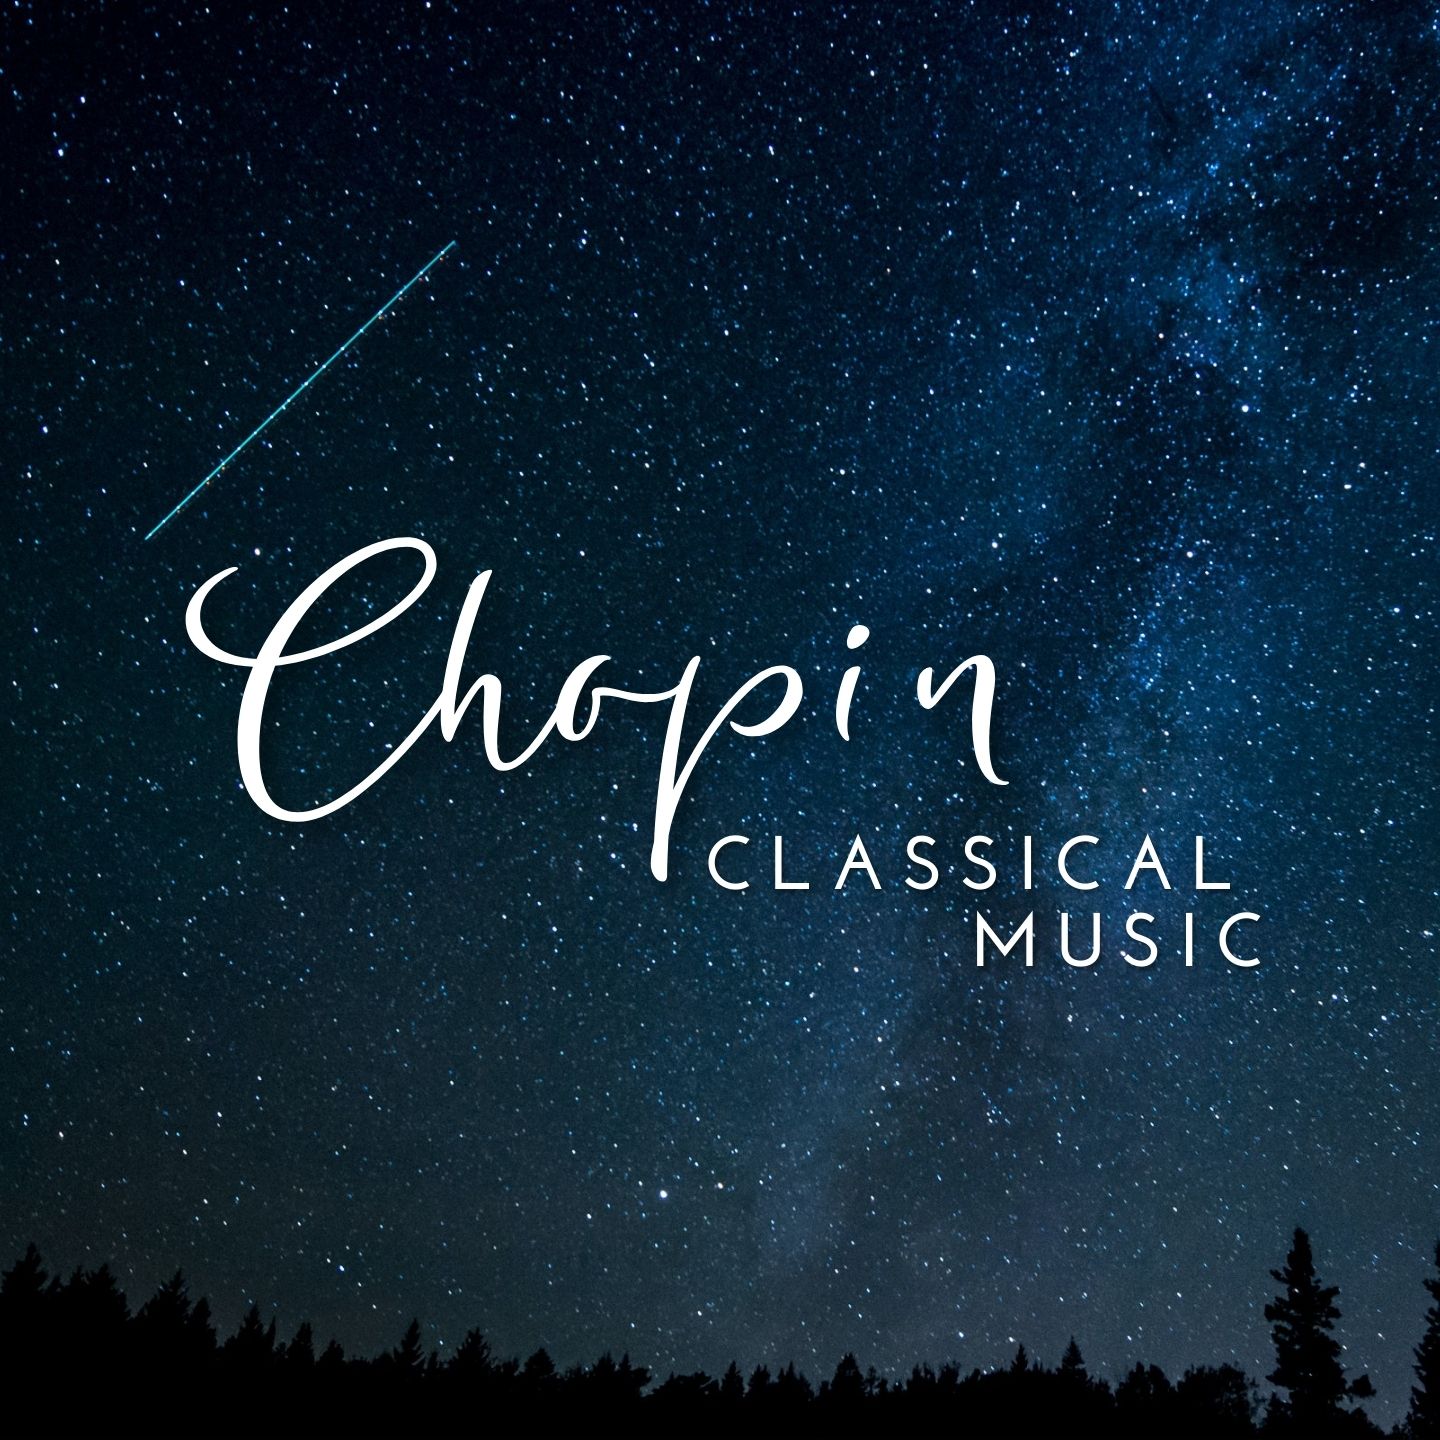 Chopin for Studying, Concentration & Relaxation